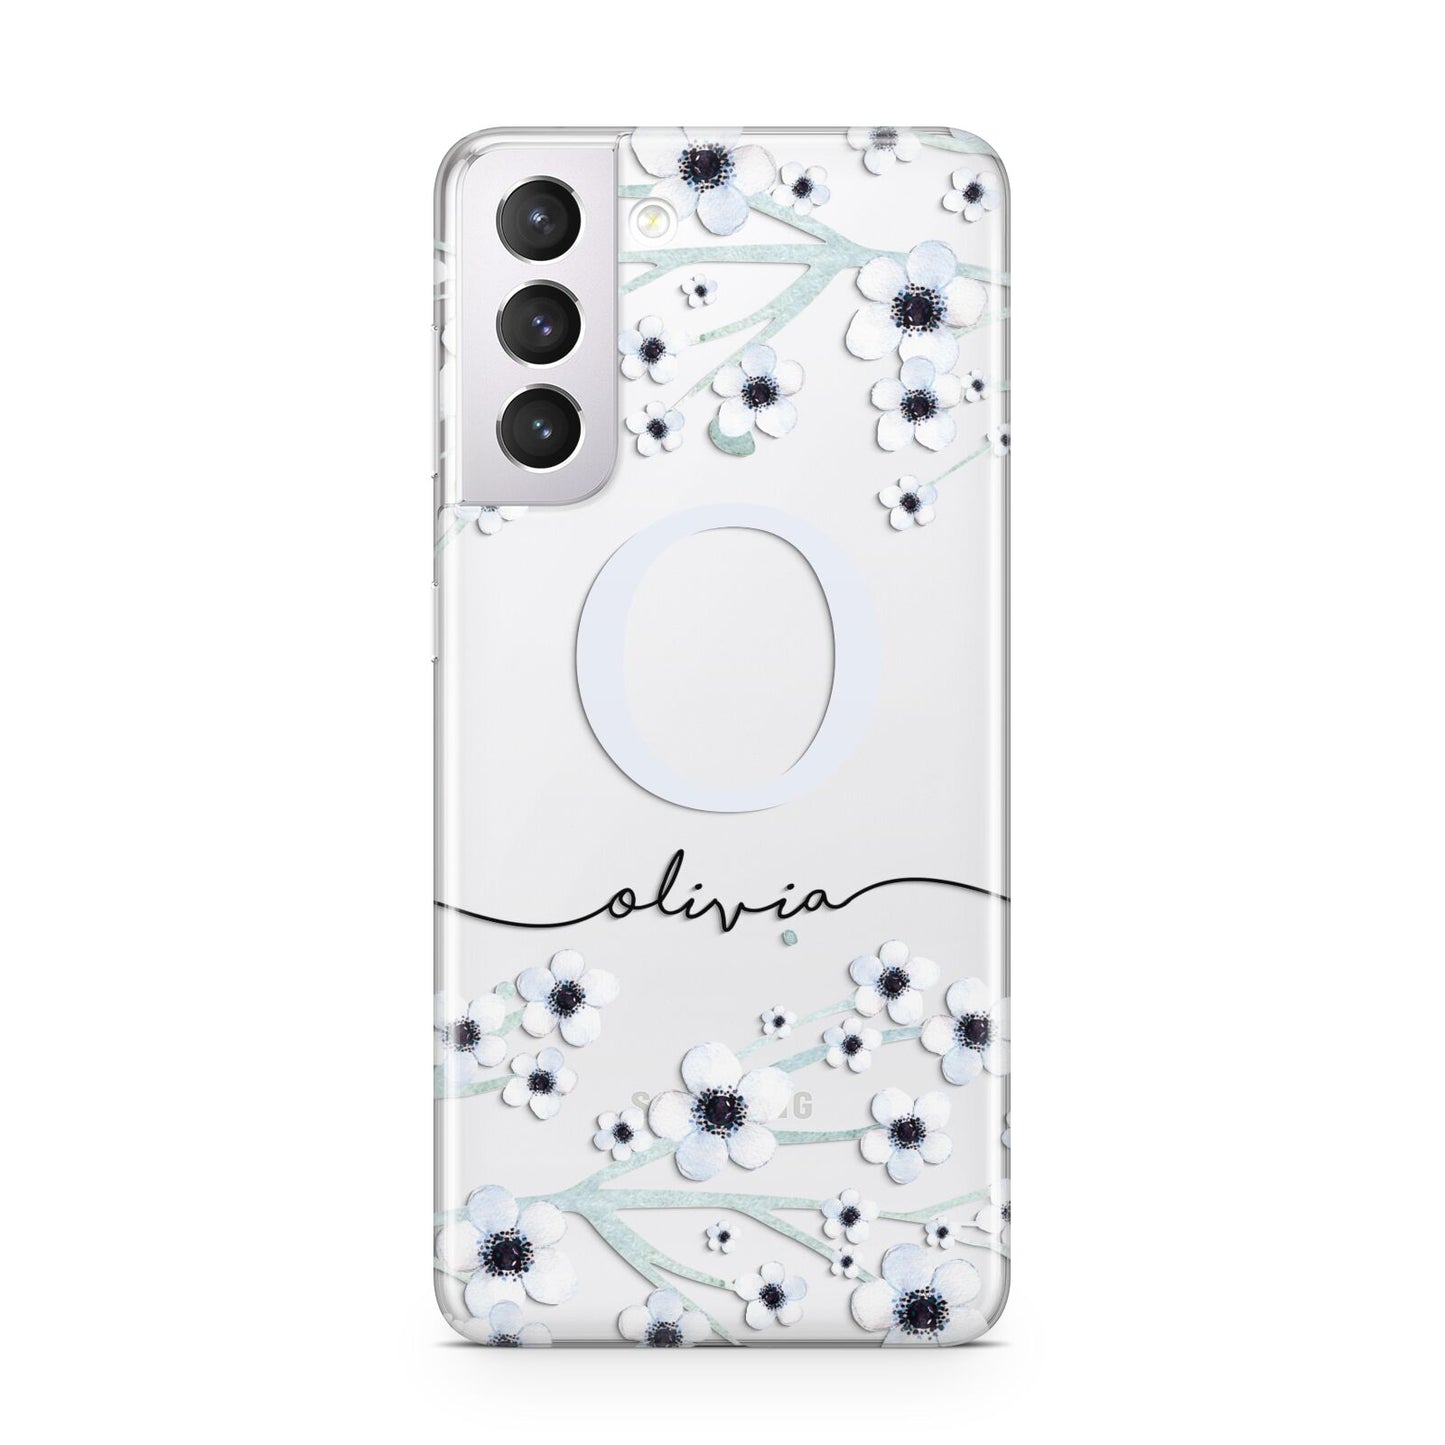 Personalised White Flower Samsung S21 Case